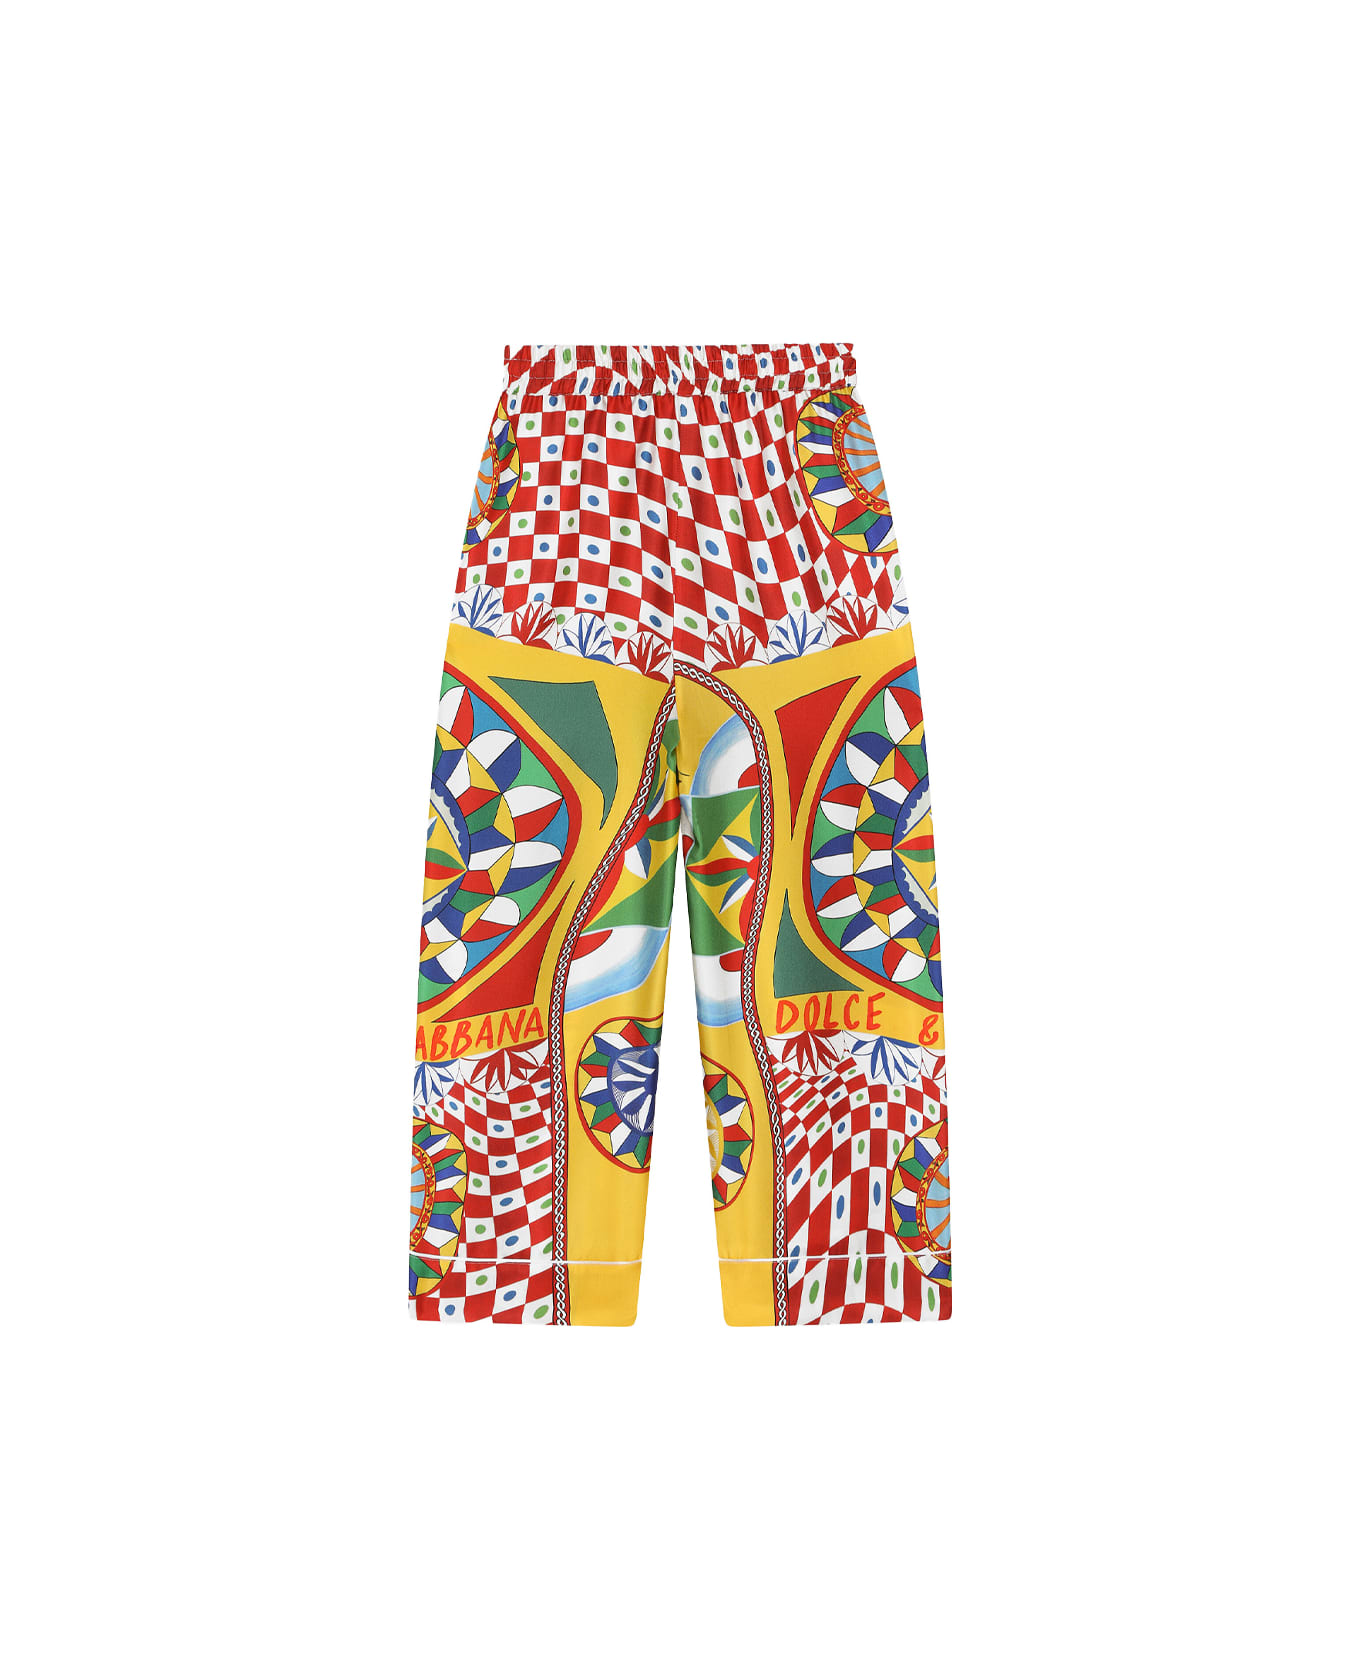 Dolce & Gabbana Twill Trousers Craghoppers With Cart Print And Contrast Piping - Multicolour